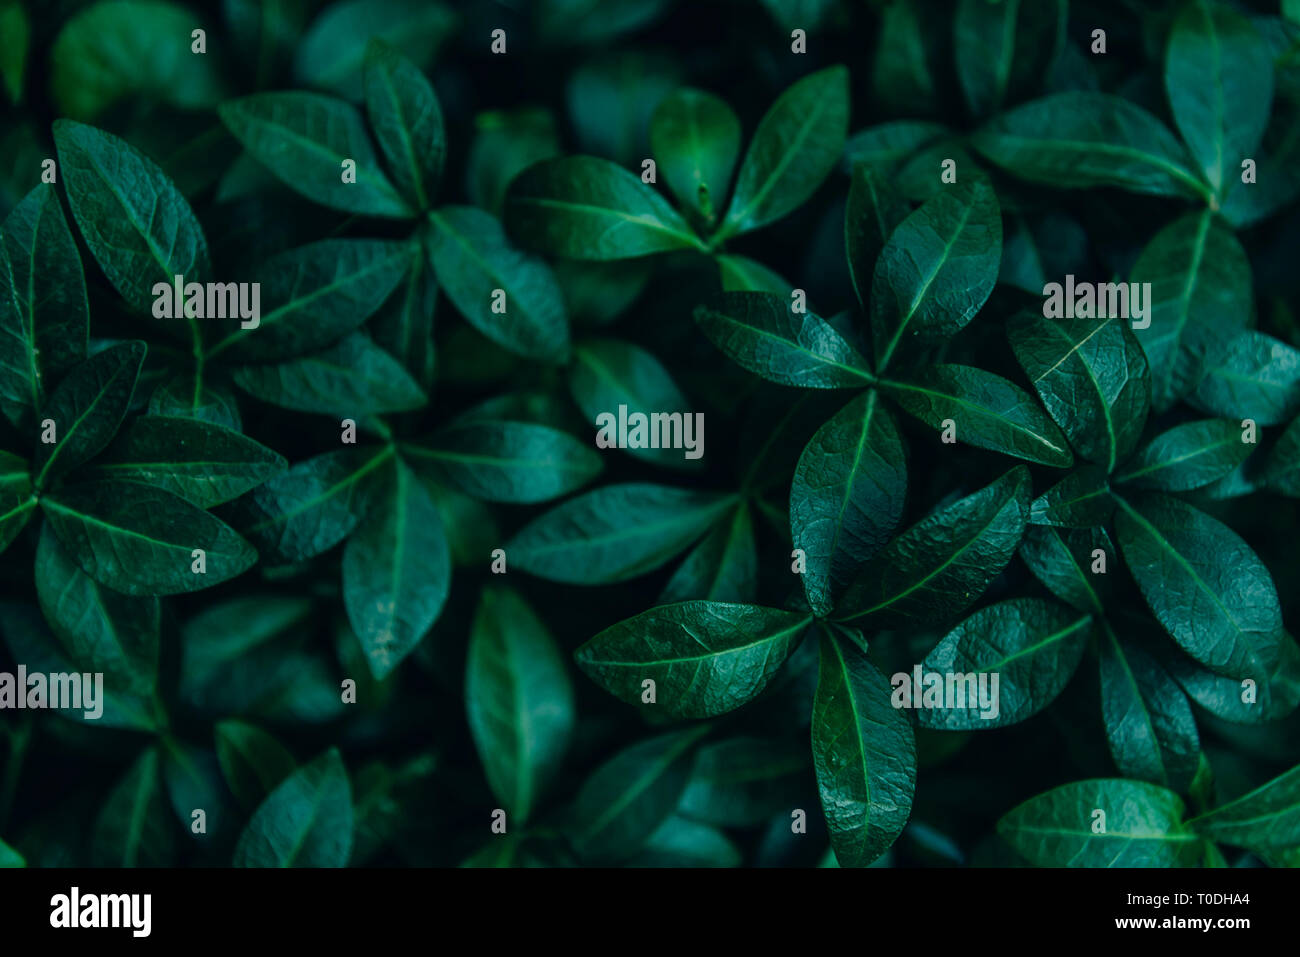 Abstract Natural Leaves Background Dark Green Foliage From Above Plant And Nature Wallpaper Design Ecology And Eco Concept Stock Photo Alamy